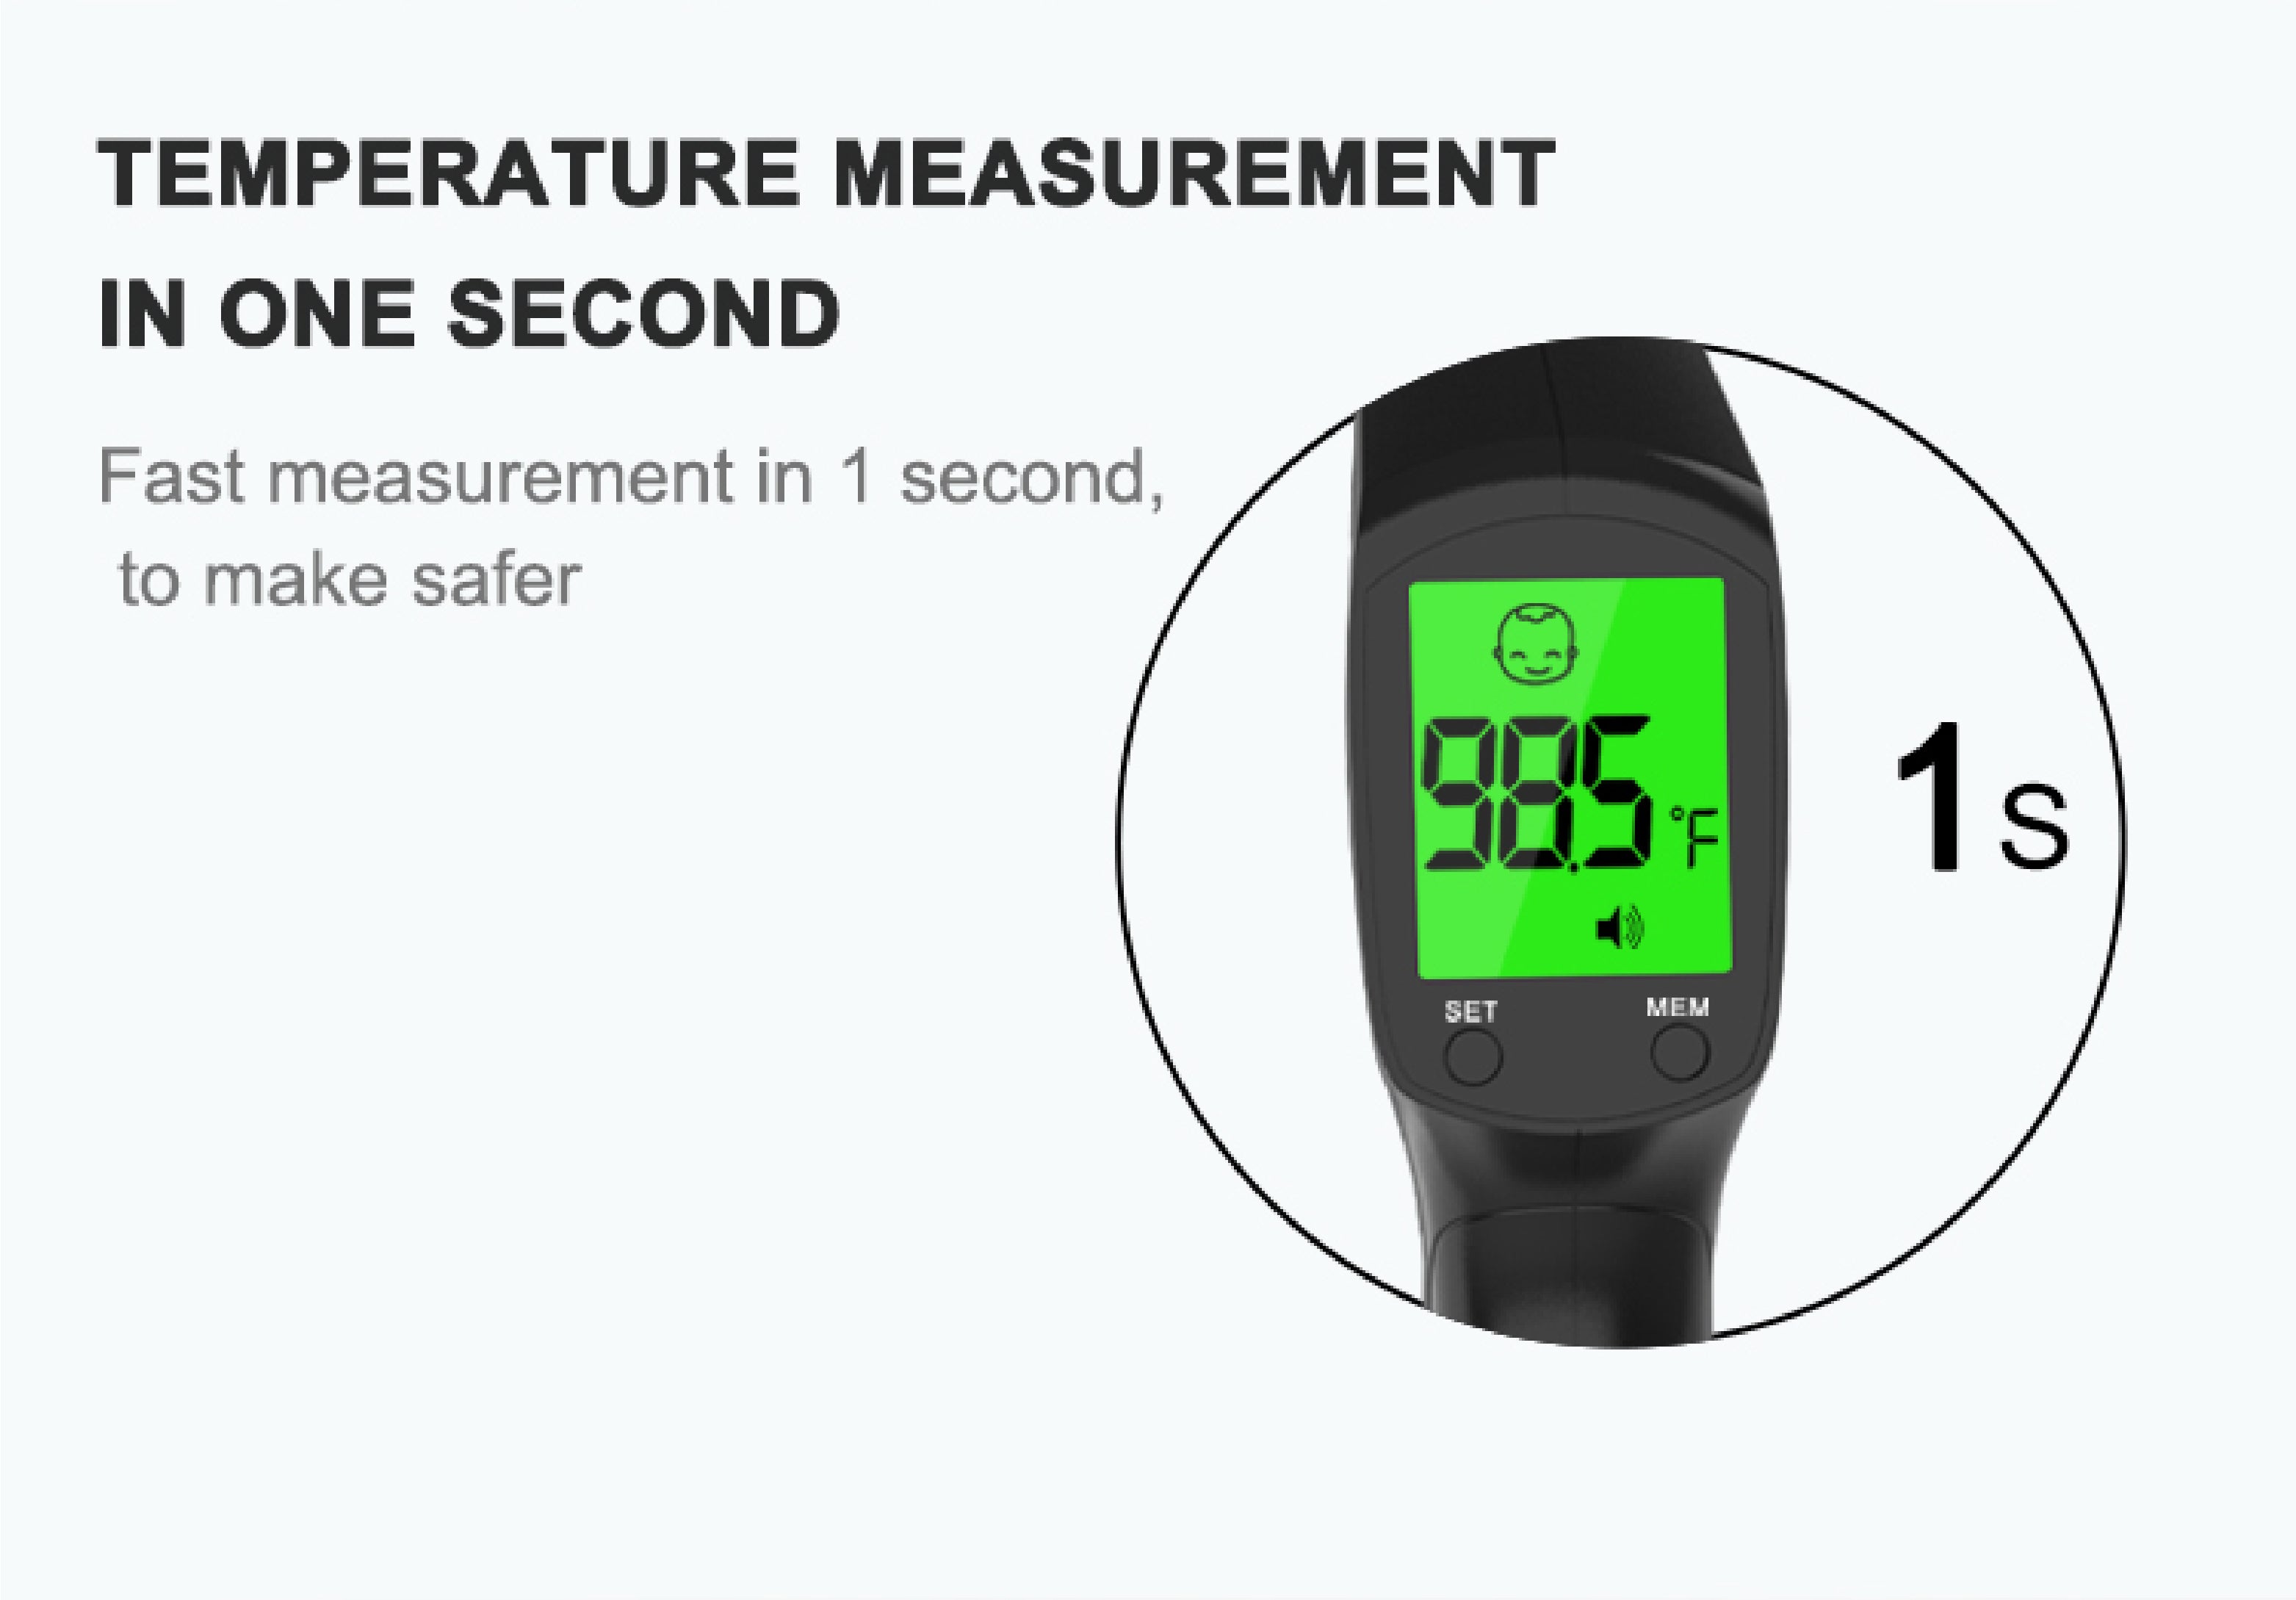 AccuInfrared-Pro: FDA-Approved Contactless Thermometer